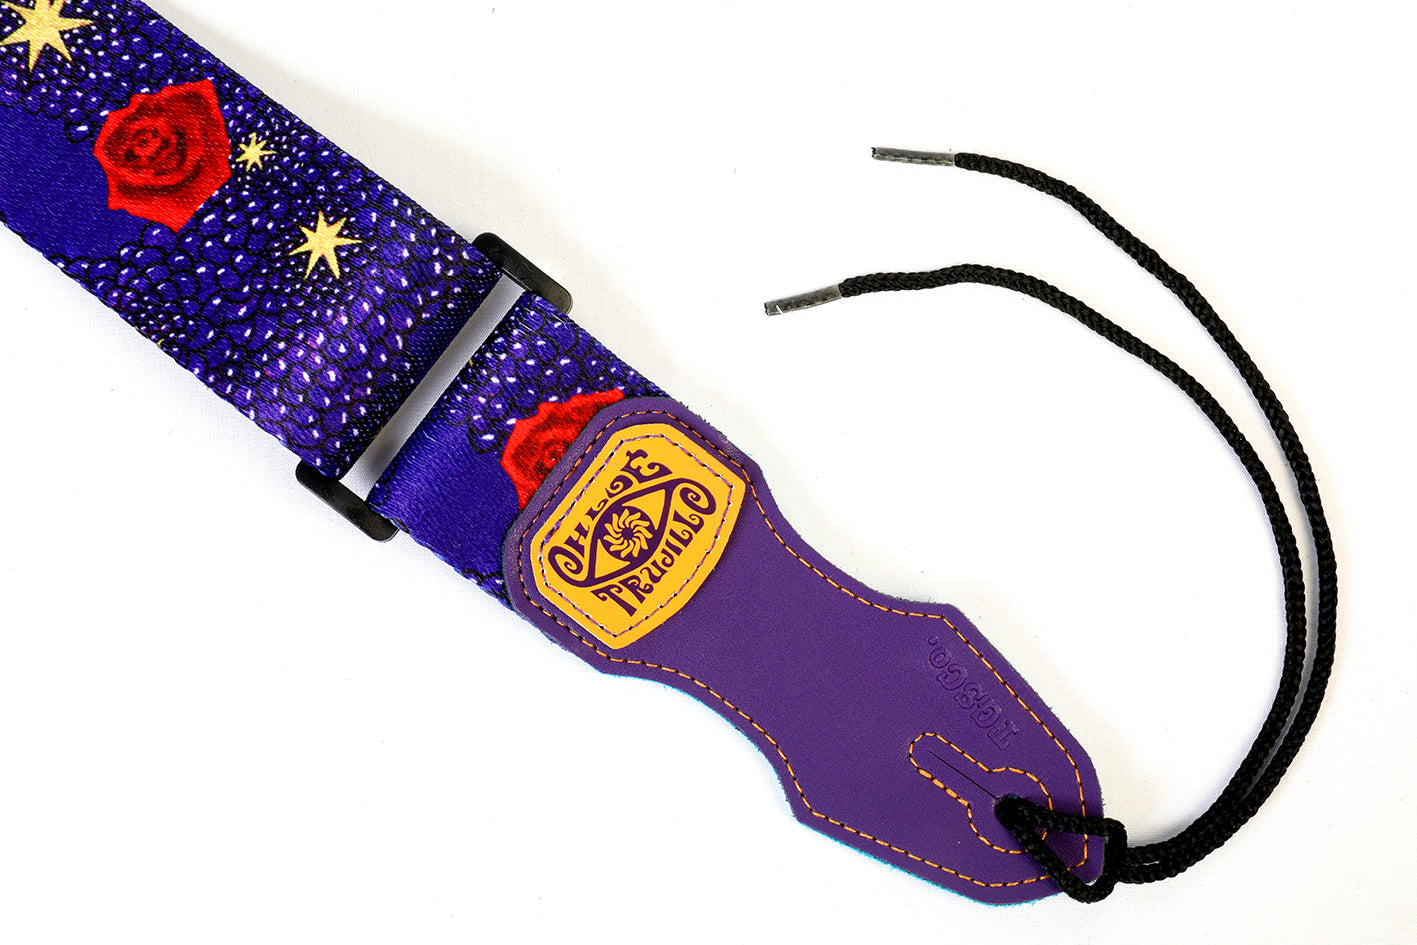 Magic Guitar Strap - SOLD OUT